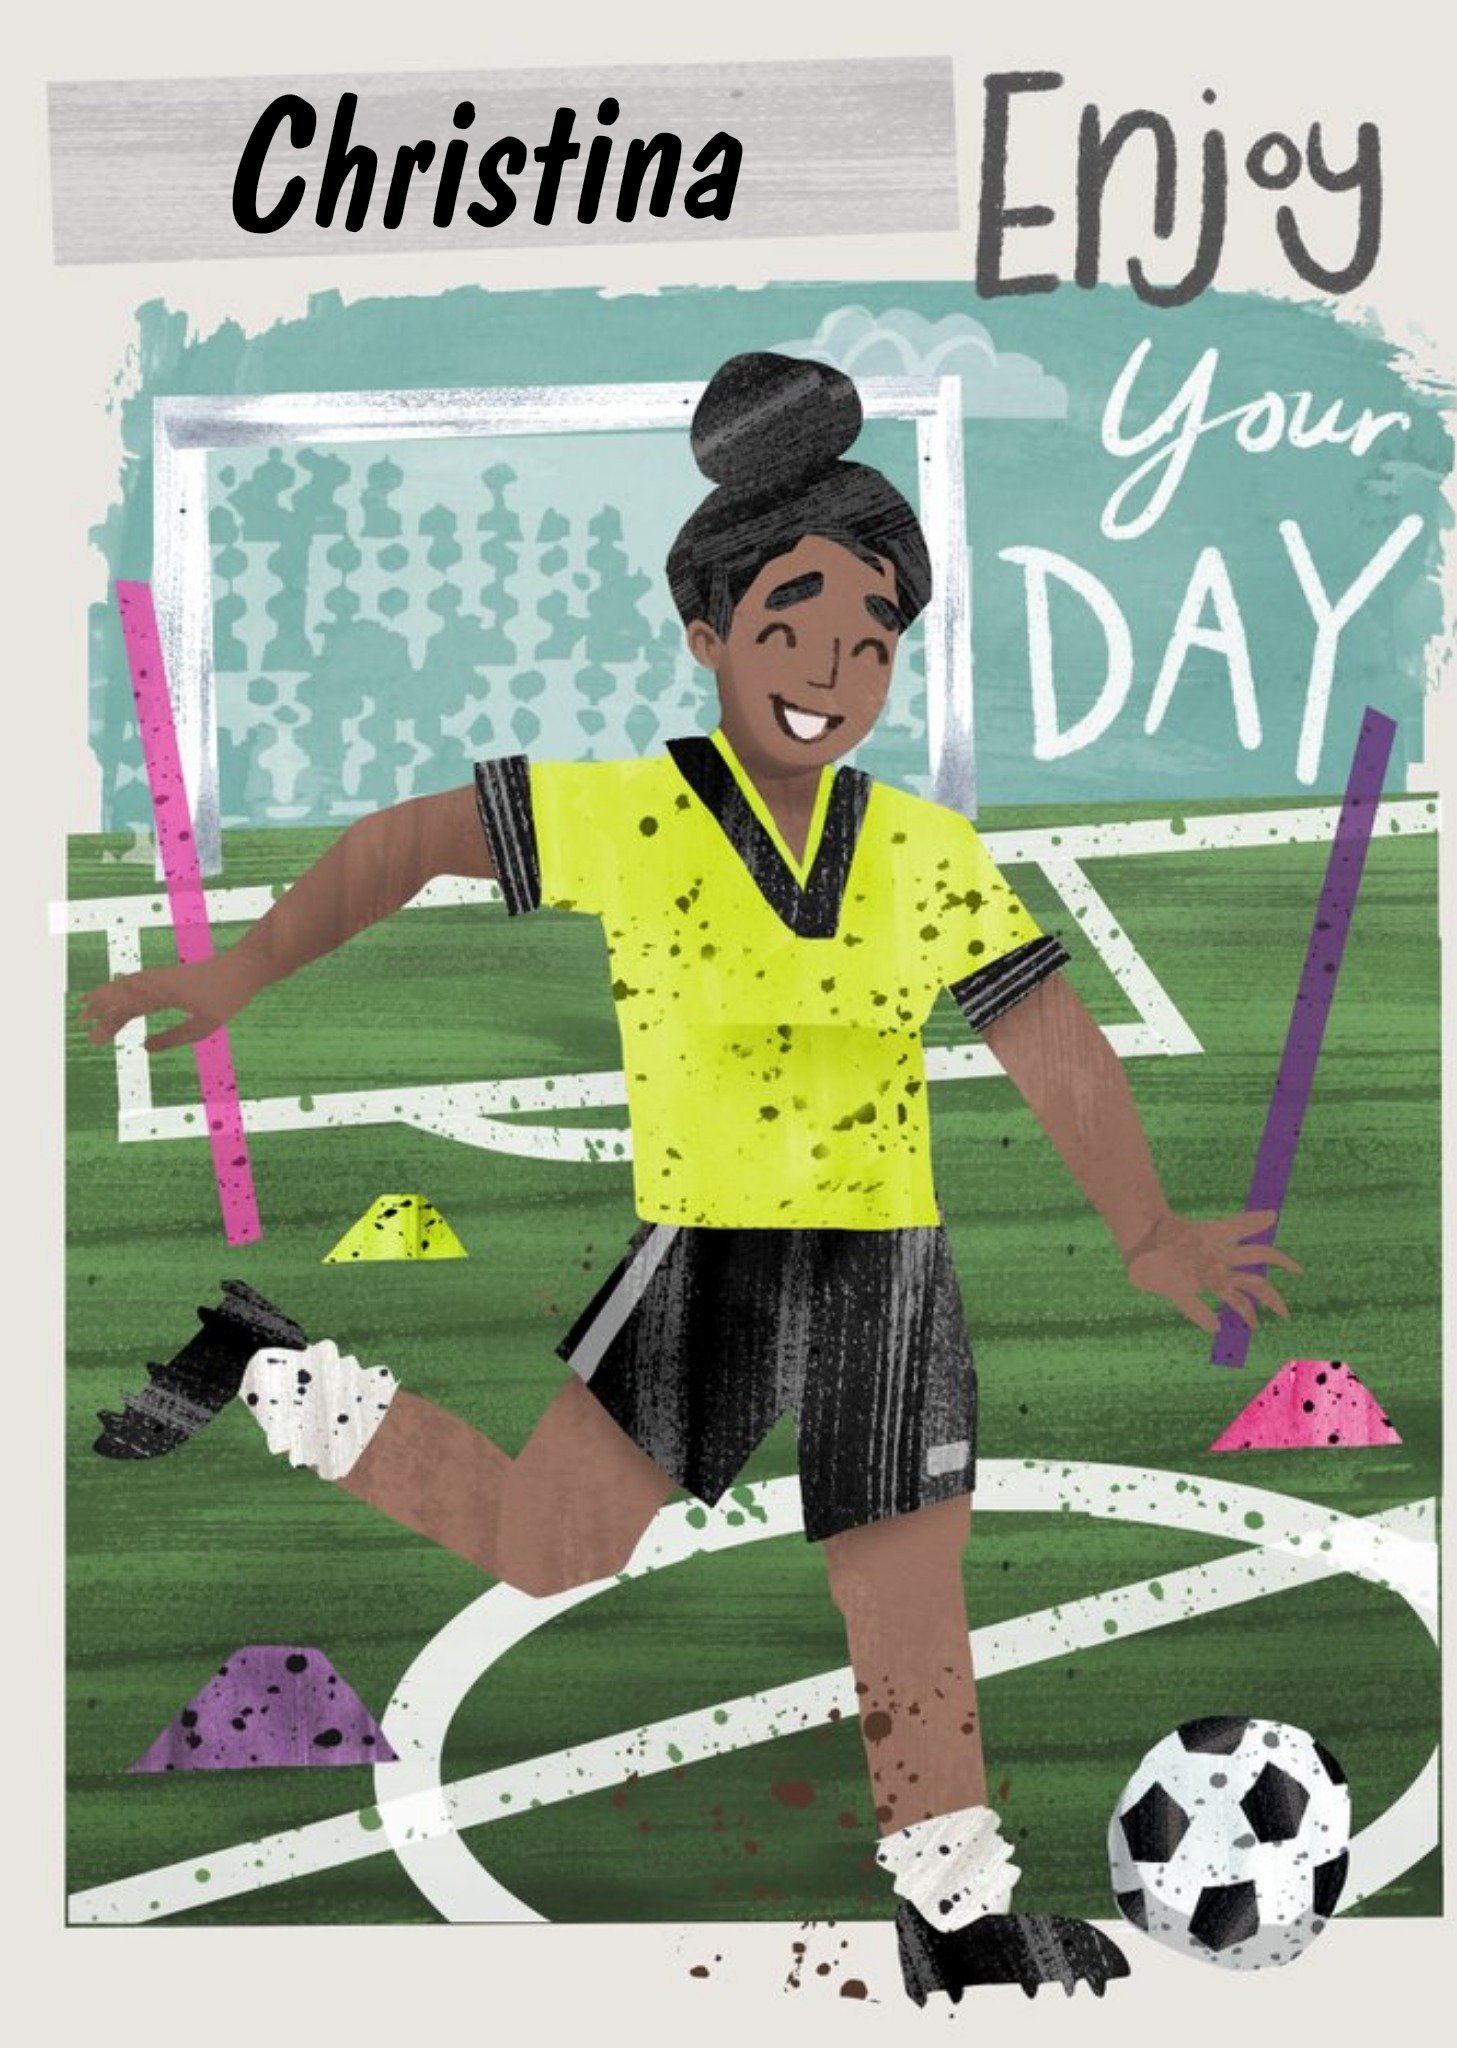 Moonpig Illustration Of A Girl Playing Football. Enjoy Your Day Birthday Card, Large